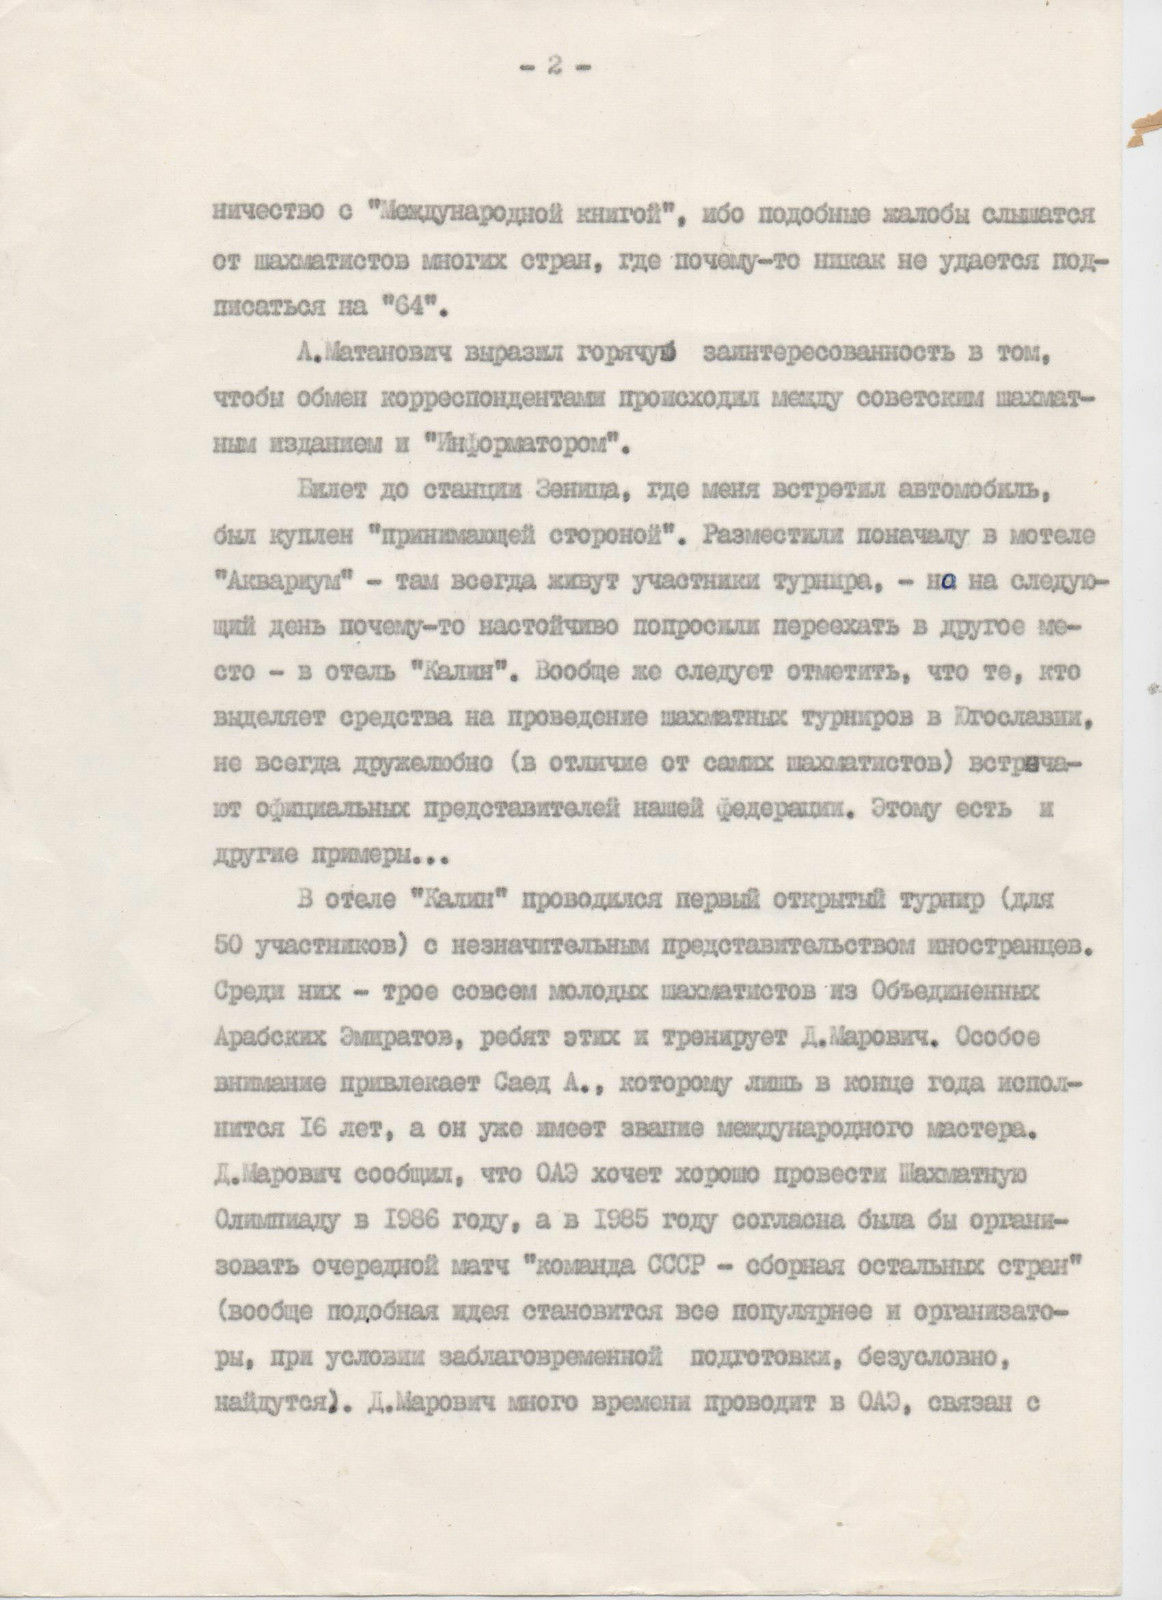 11588.Russian Chess: A.Roshal. Report on trip to Yugoslavia June 5-13, 1984